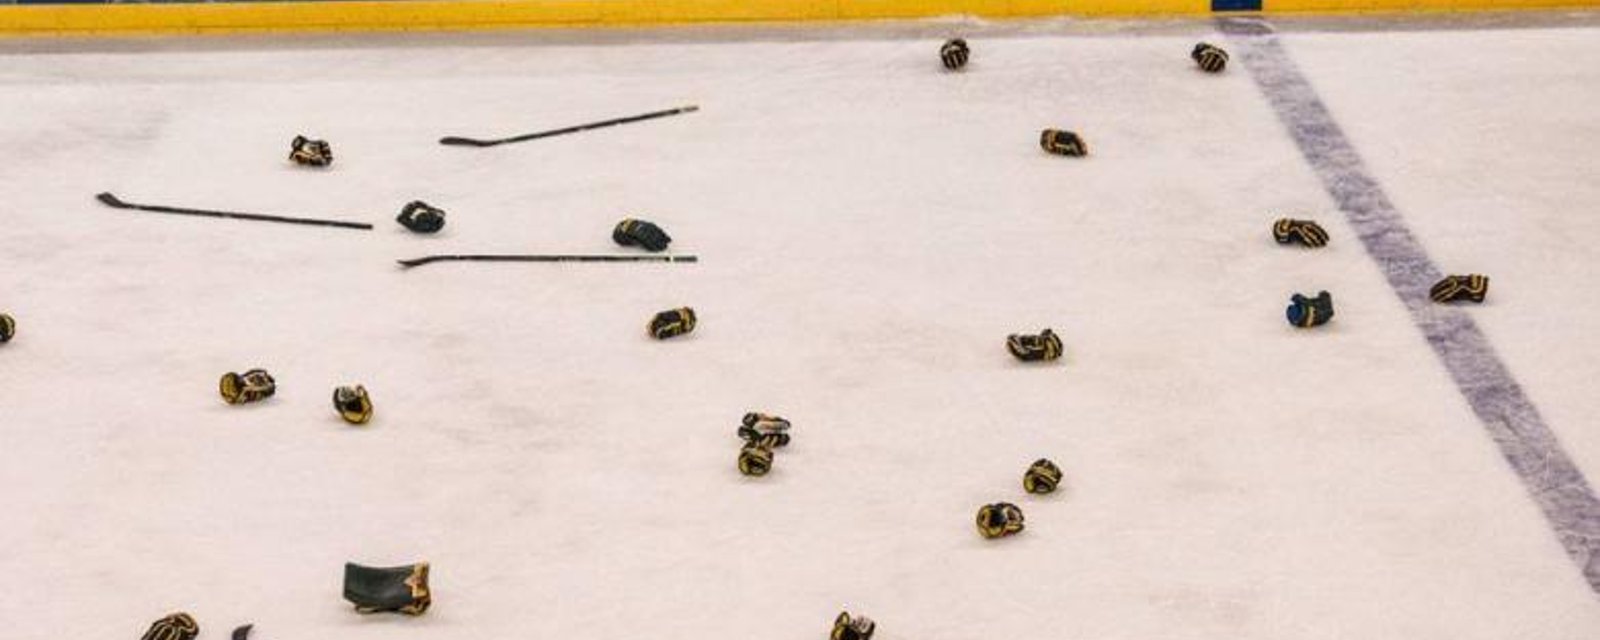 NHL team takes drastic action to help team avoid taking penalties